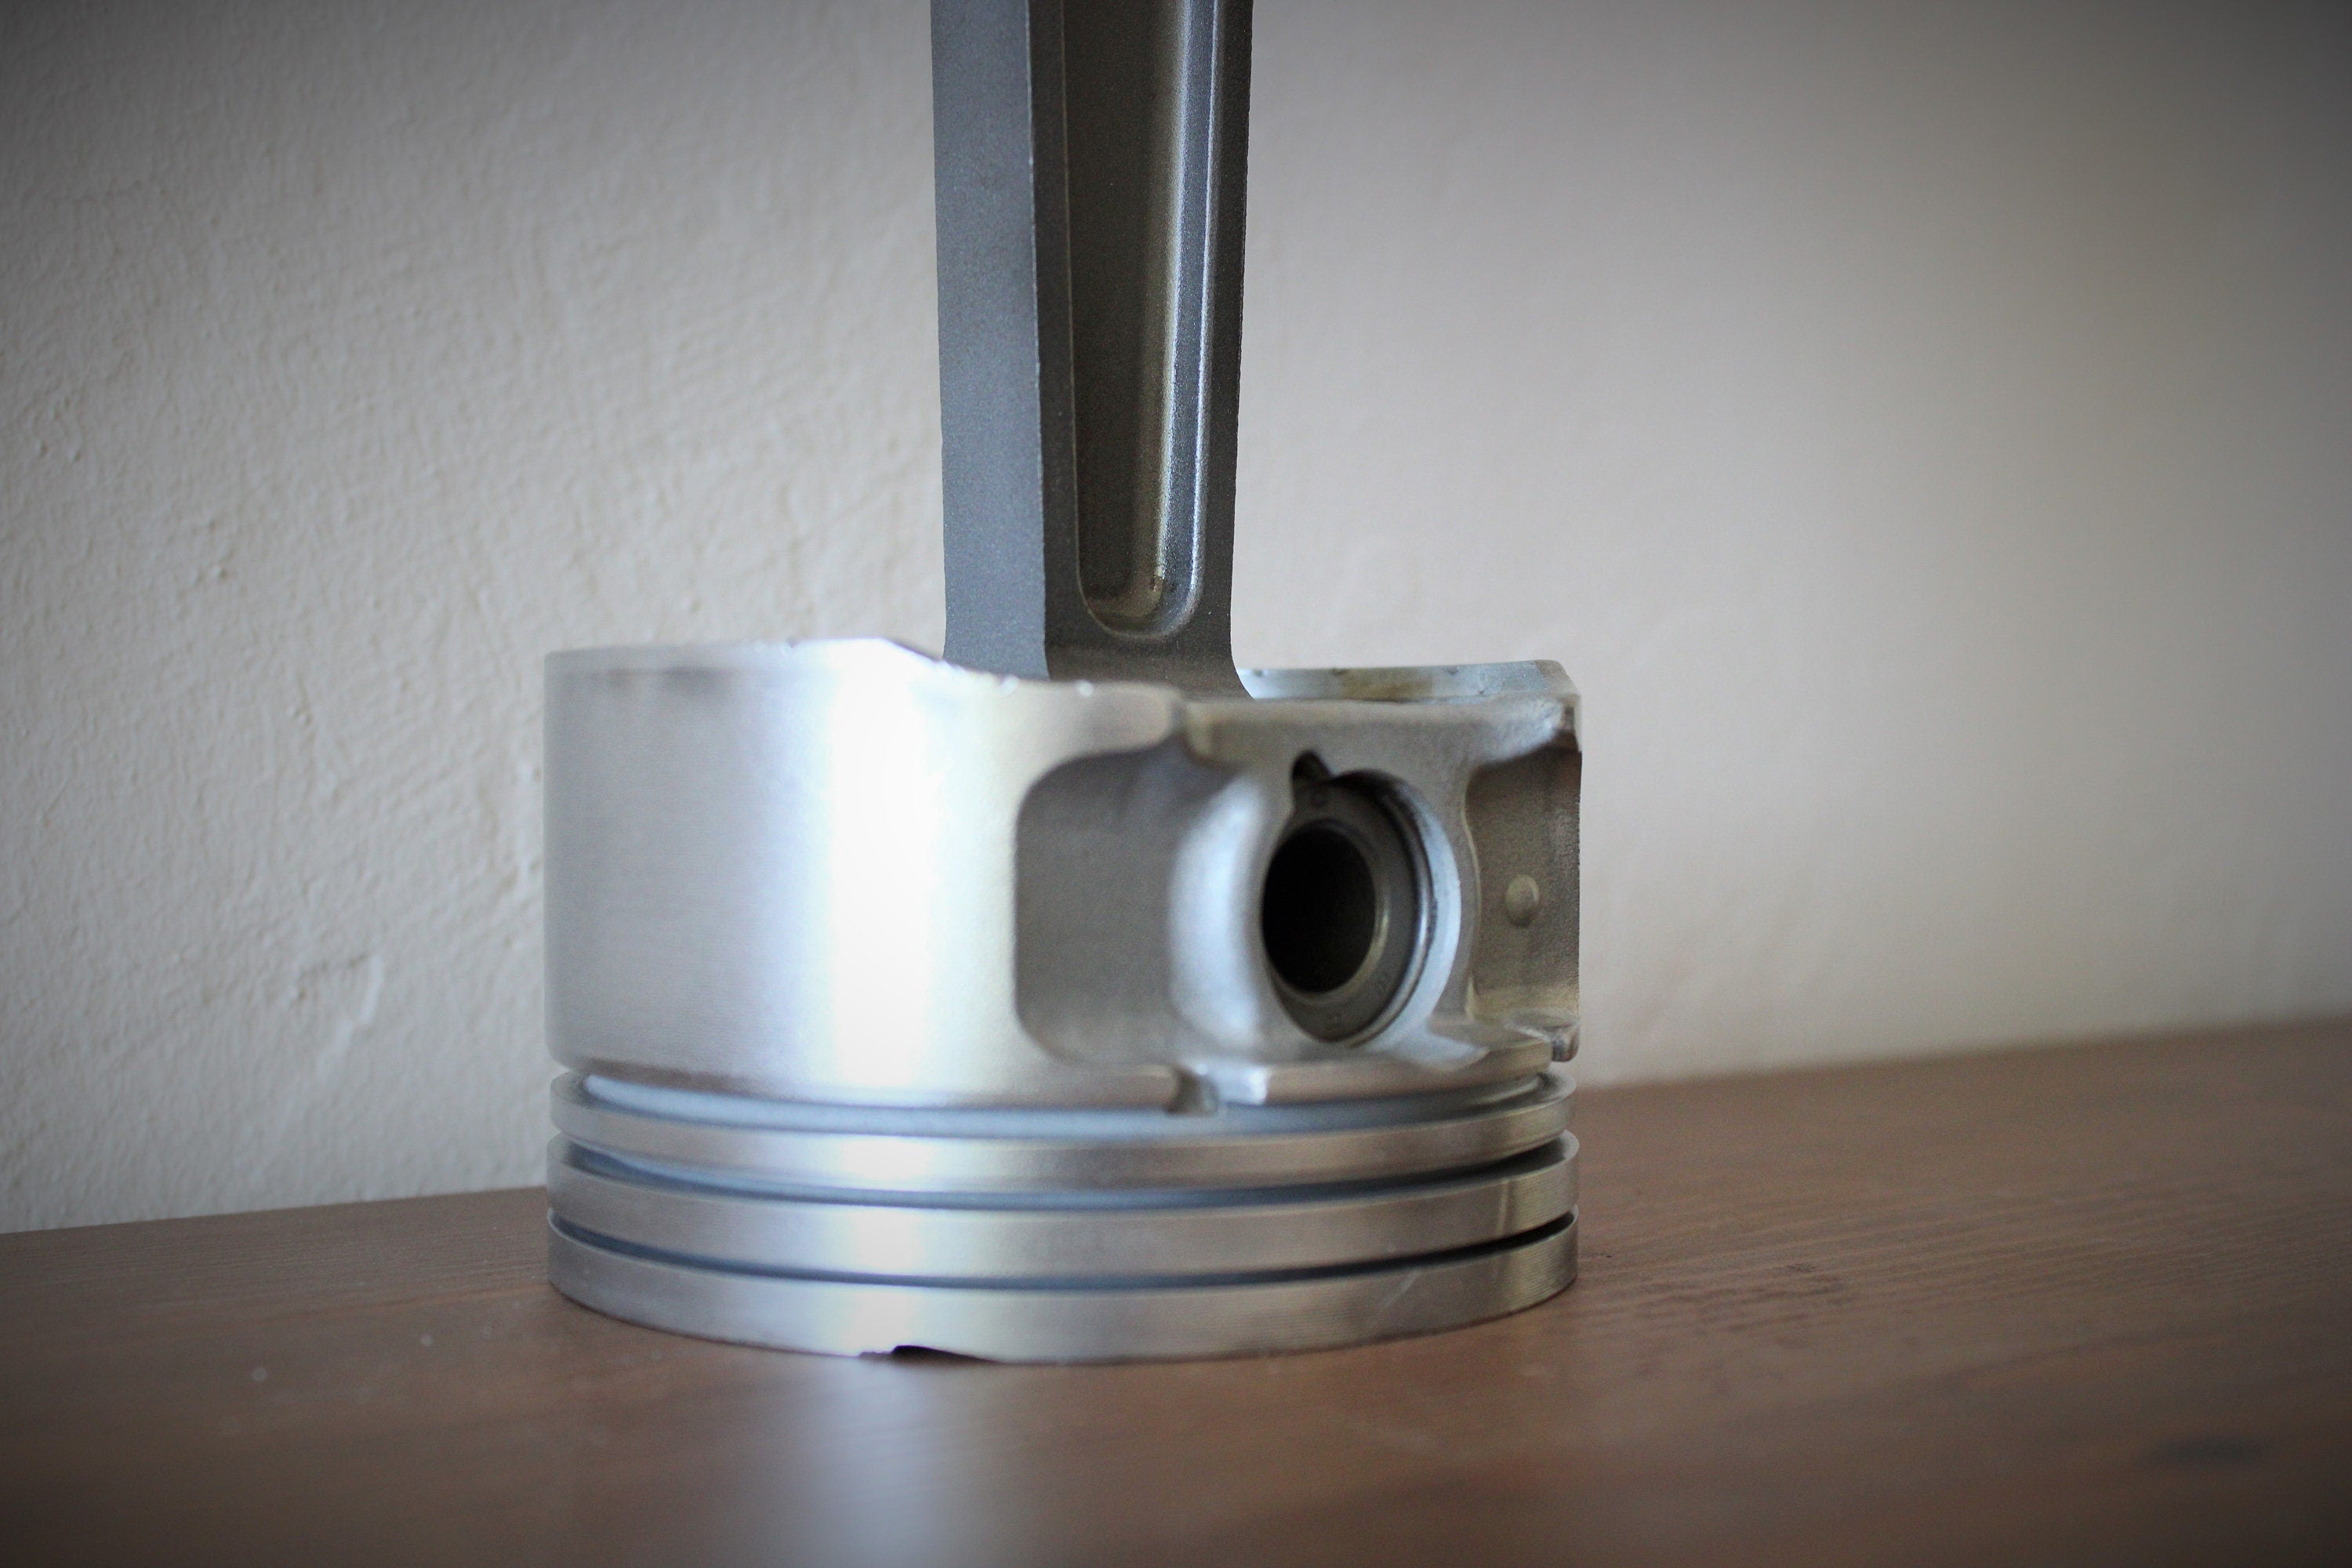 Close-up view of a piston clock made from a Jaguar car's piston, finished in gunmetal gray.